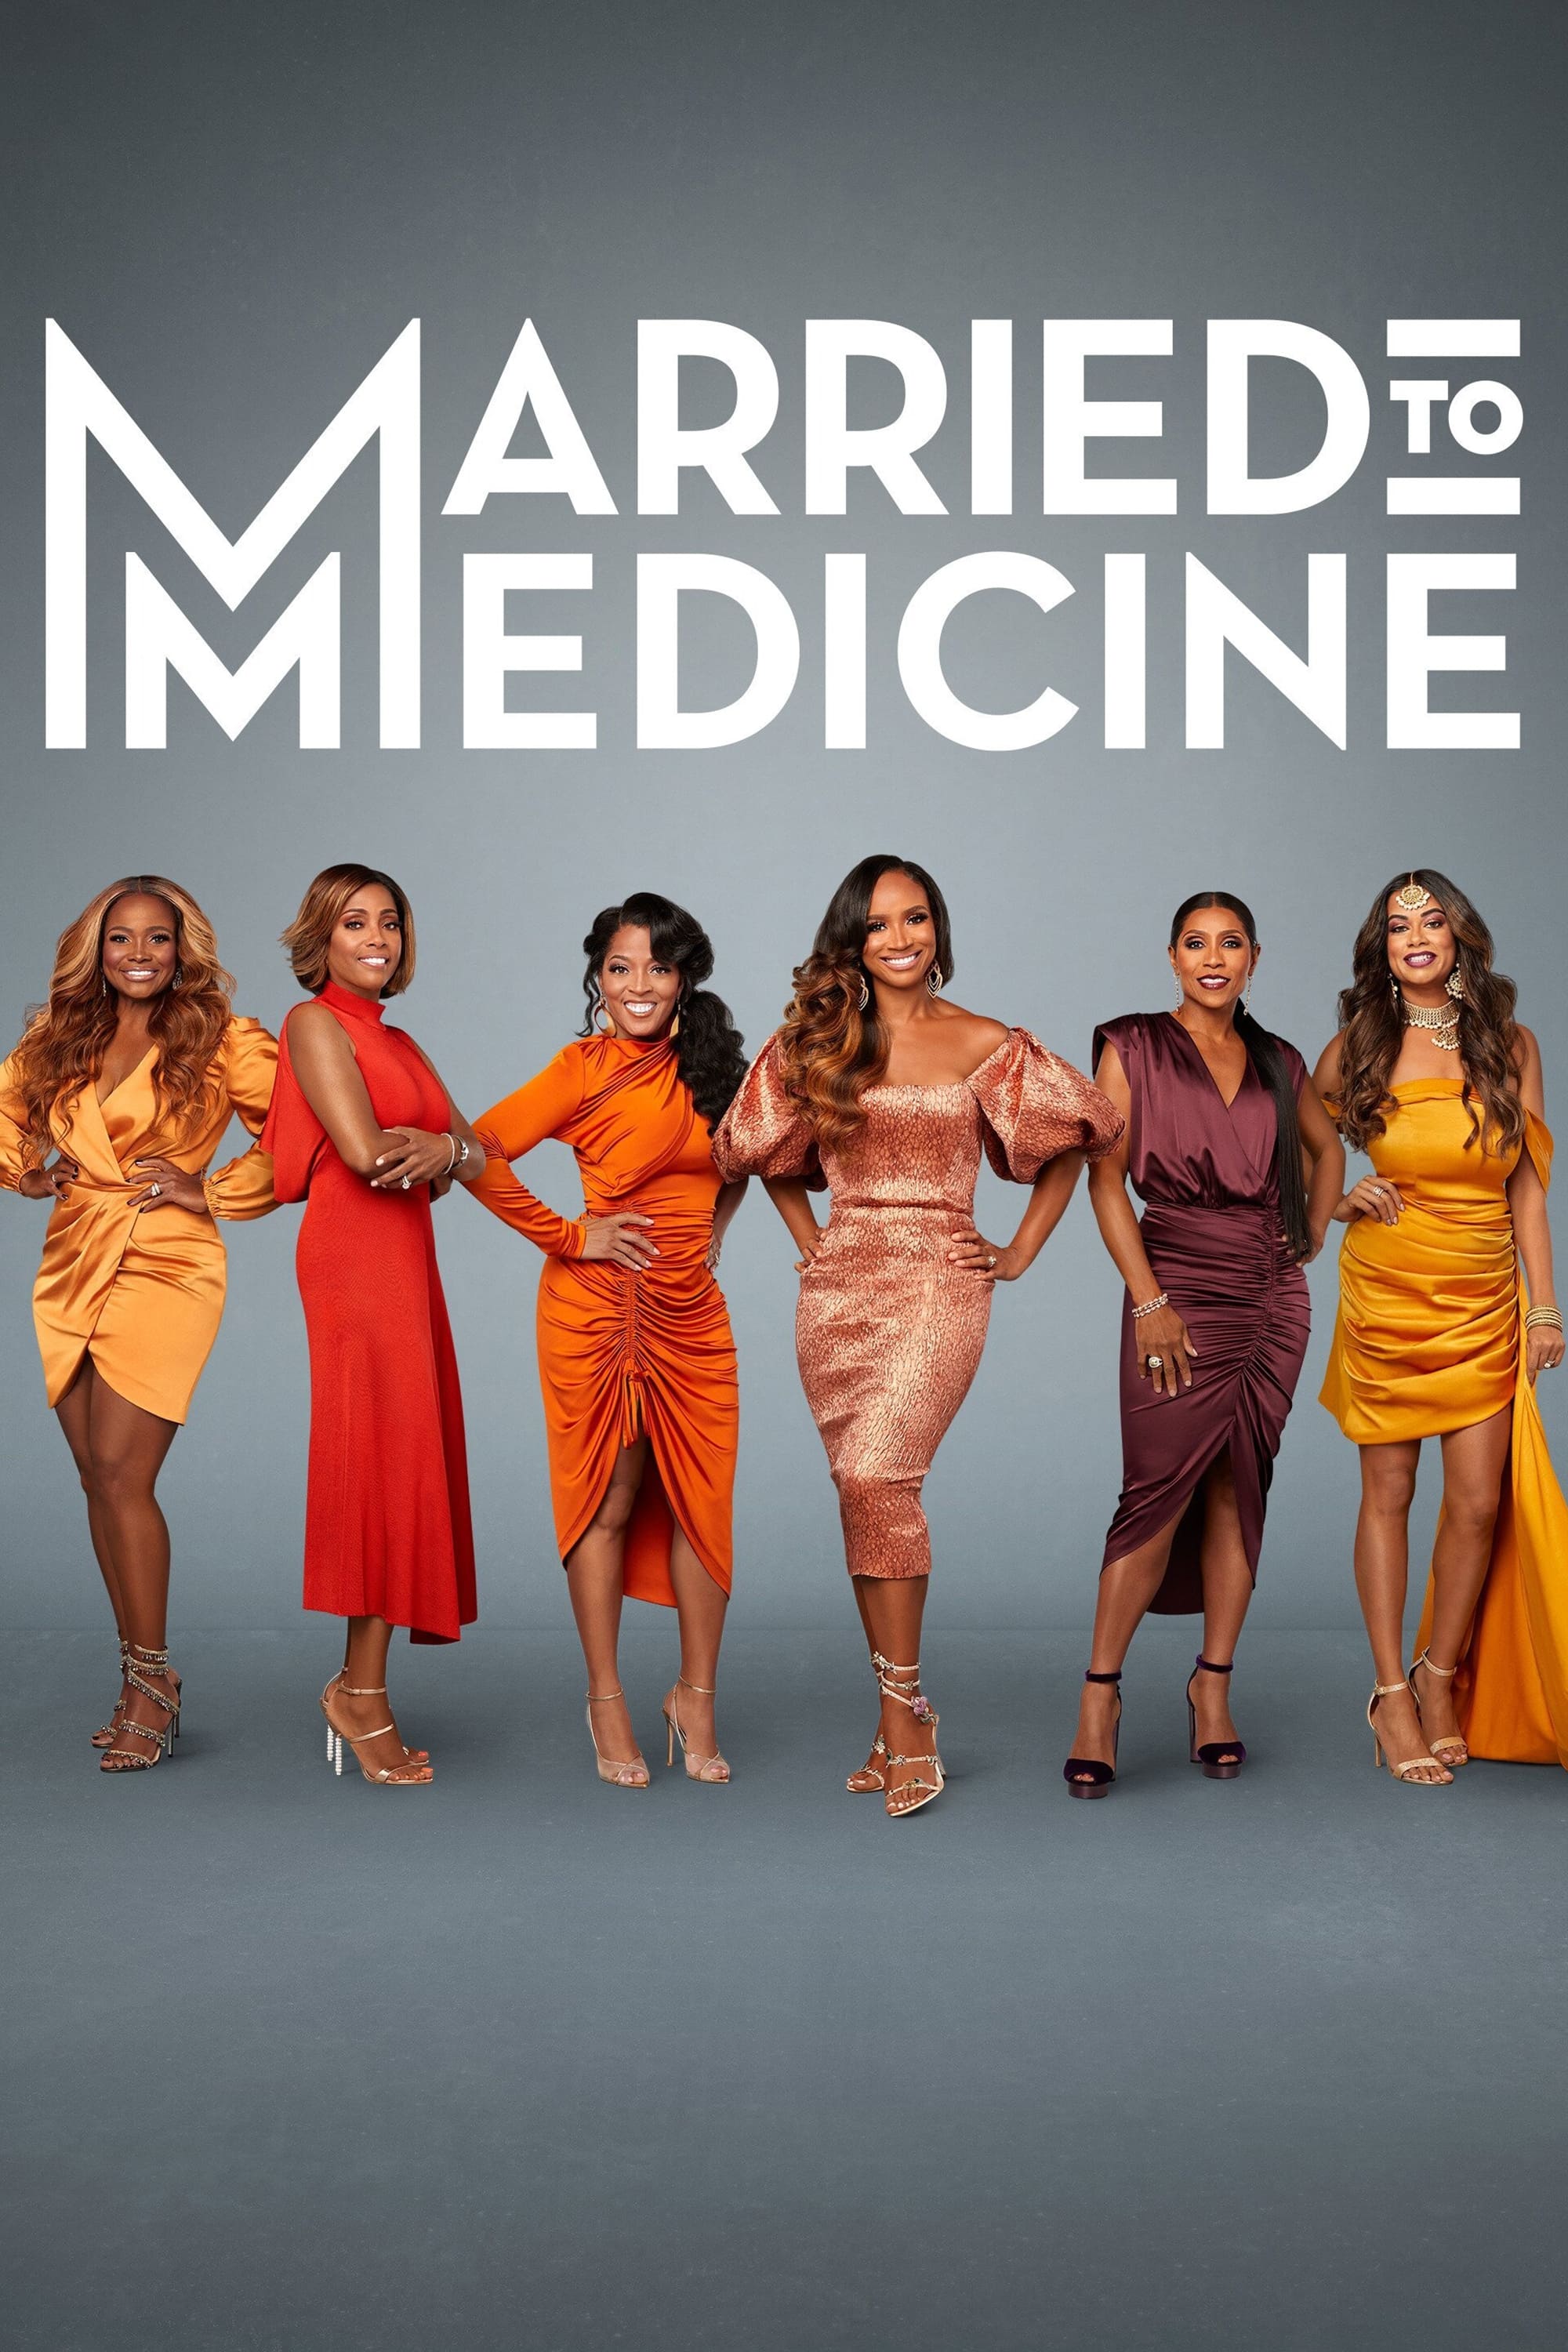 Married to Medicine TV Shows About Georgia